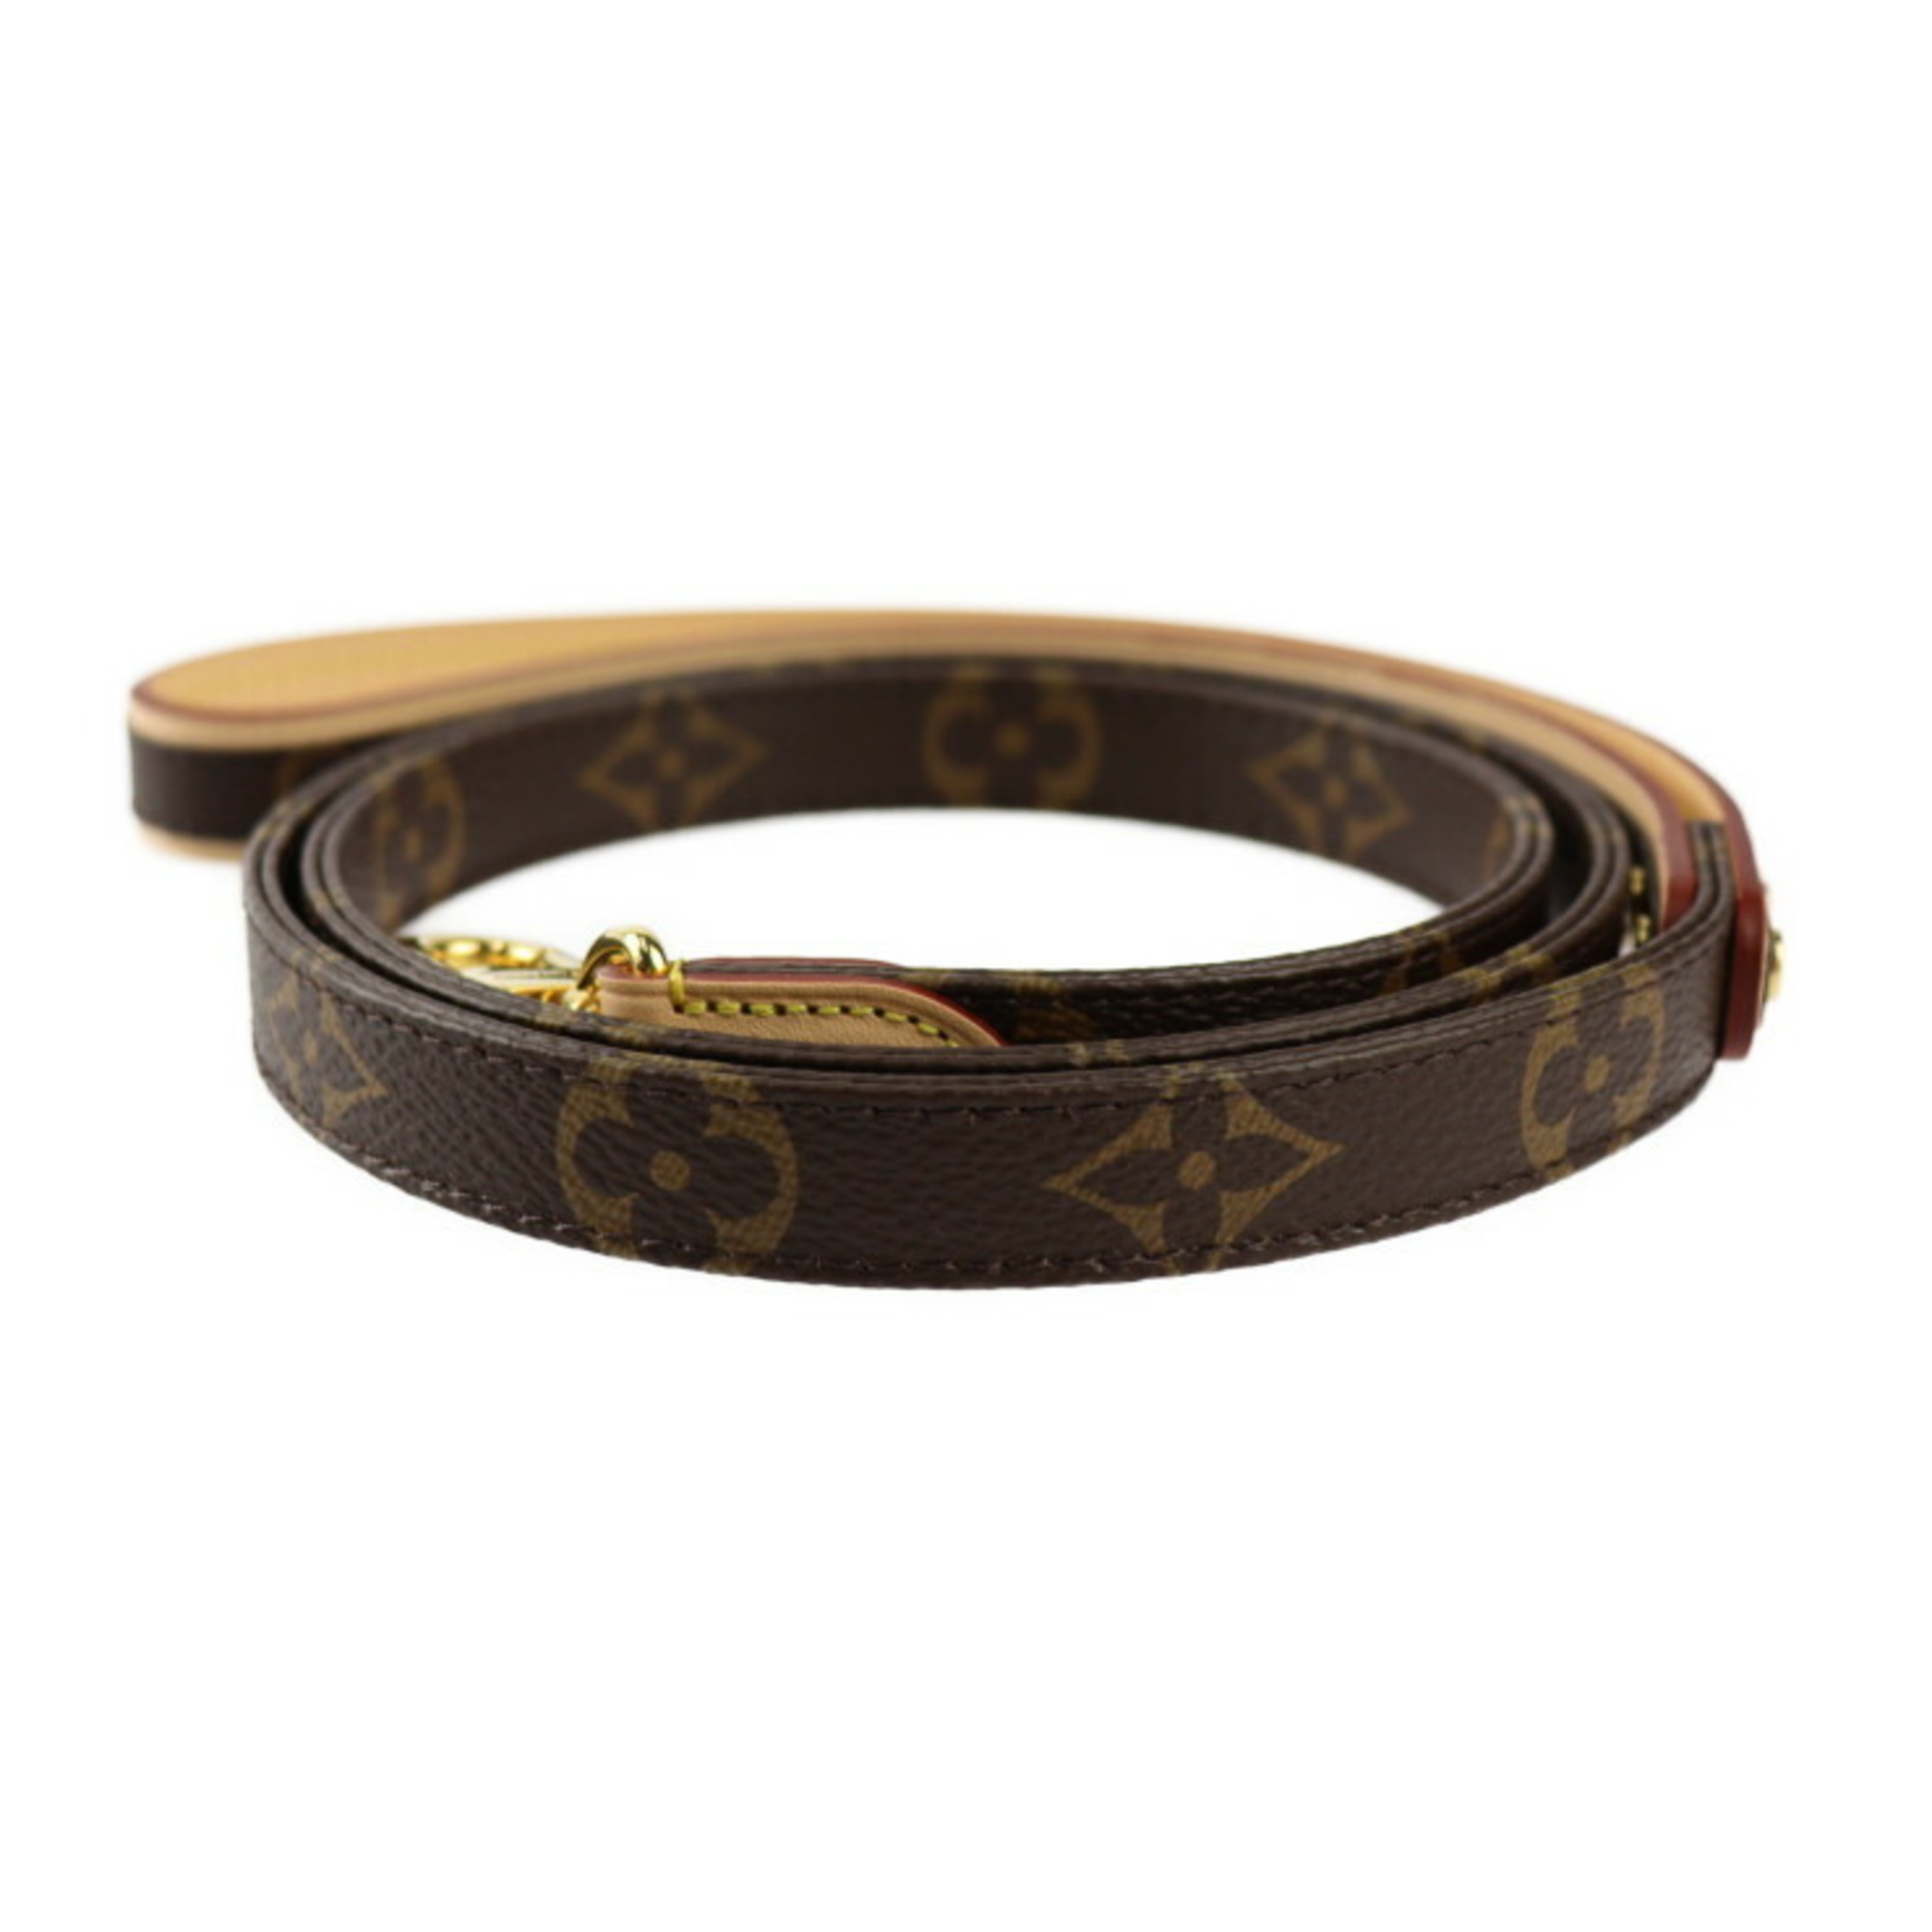 LOUIS VUITTON Dog Leash Other Miscellaneous Goods M80338 Monogram Canvas Leather Brown Gold Hardware Lead for Medium Dogs Pet Supplies